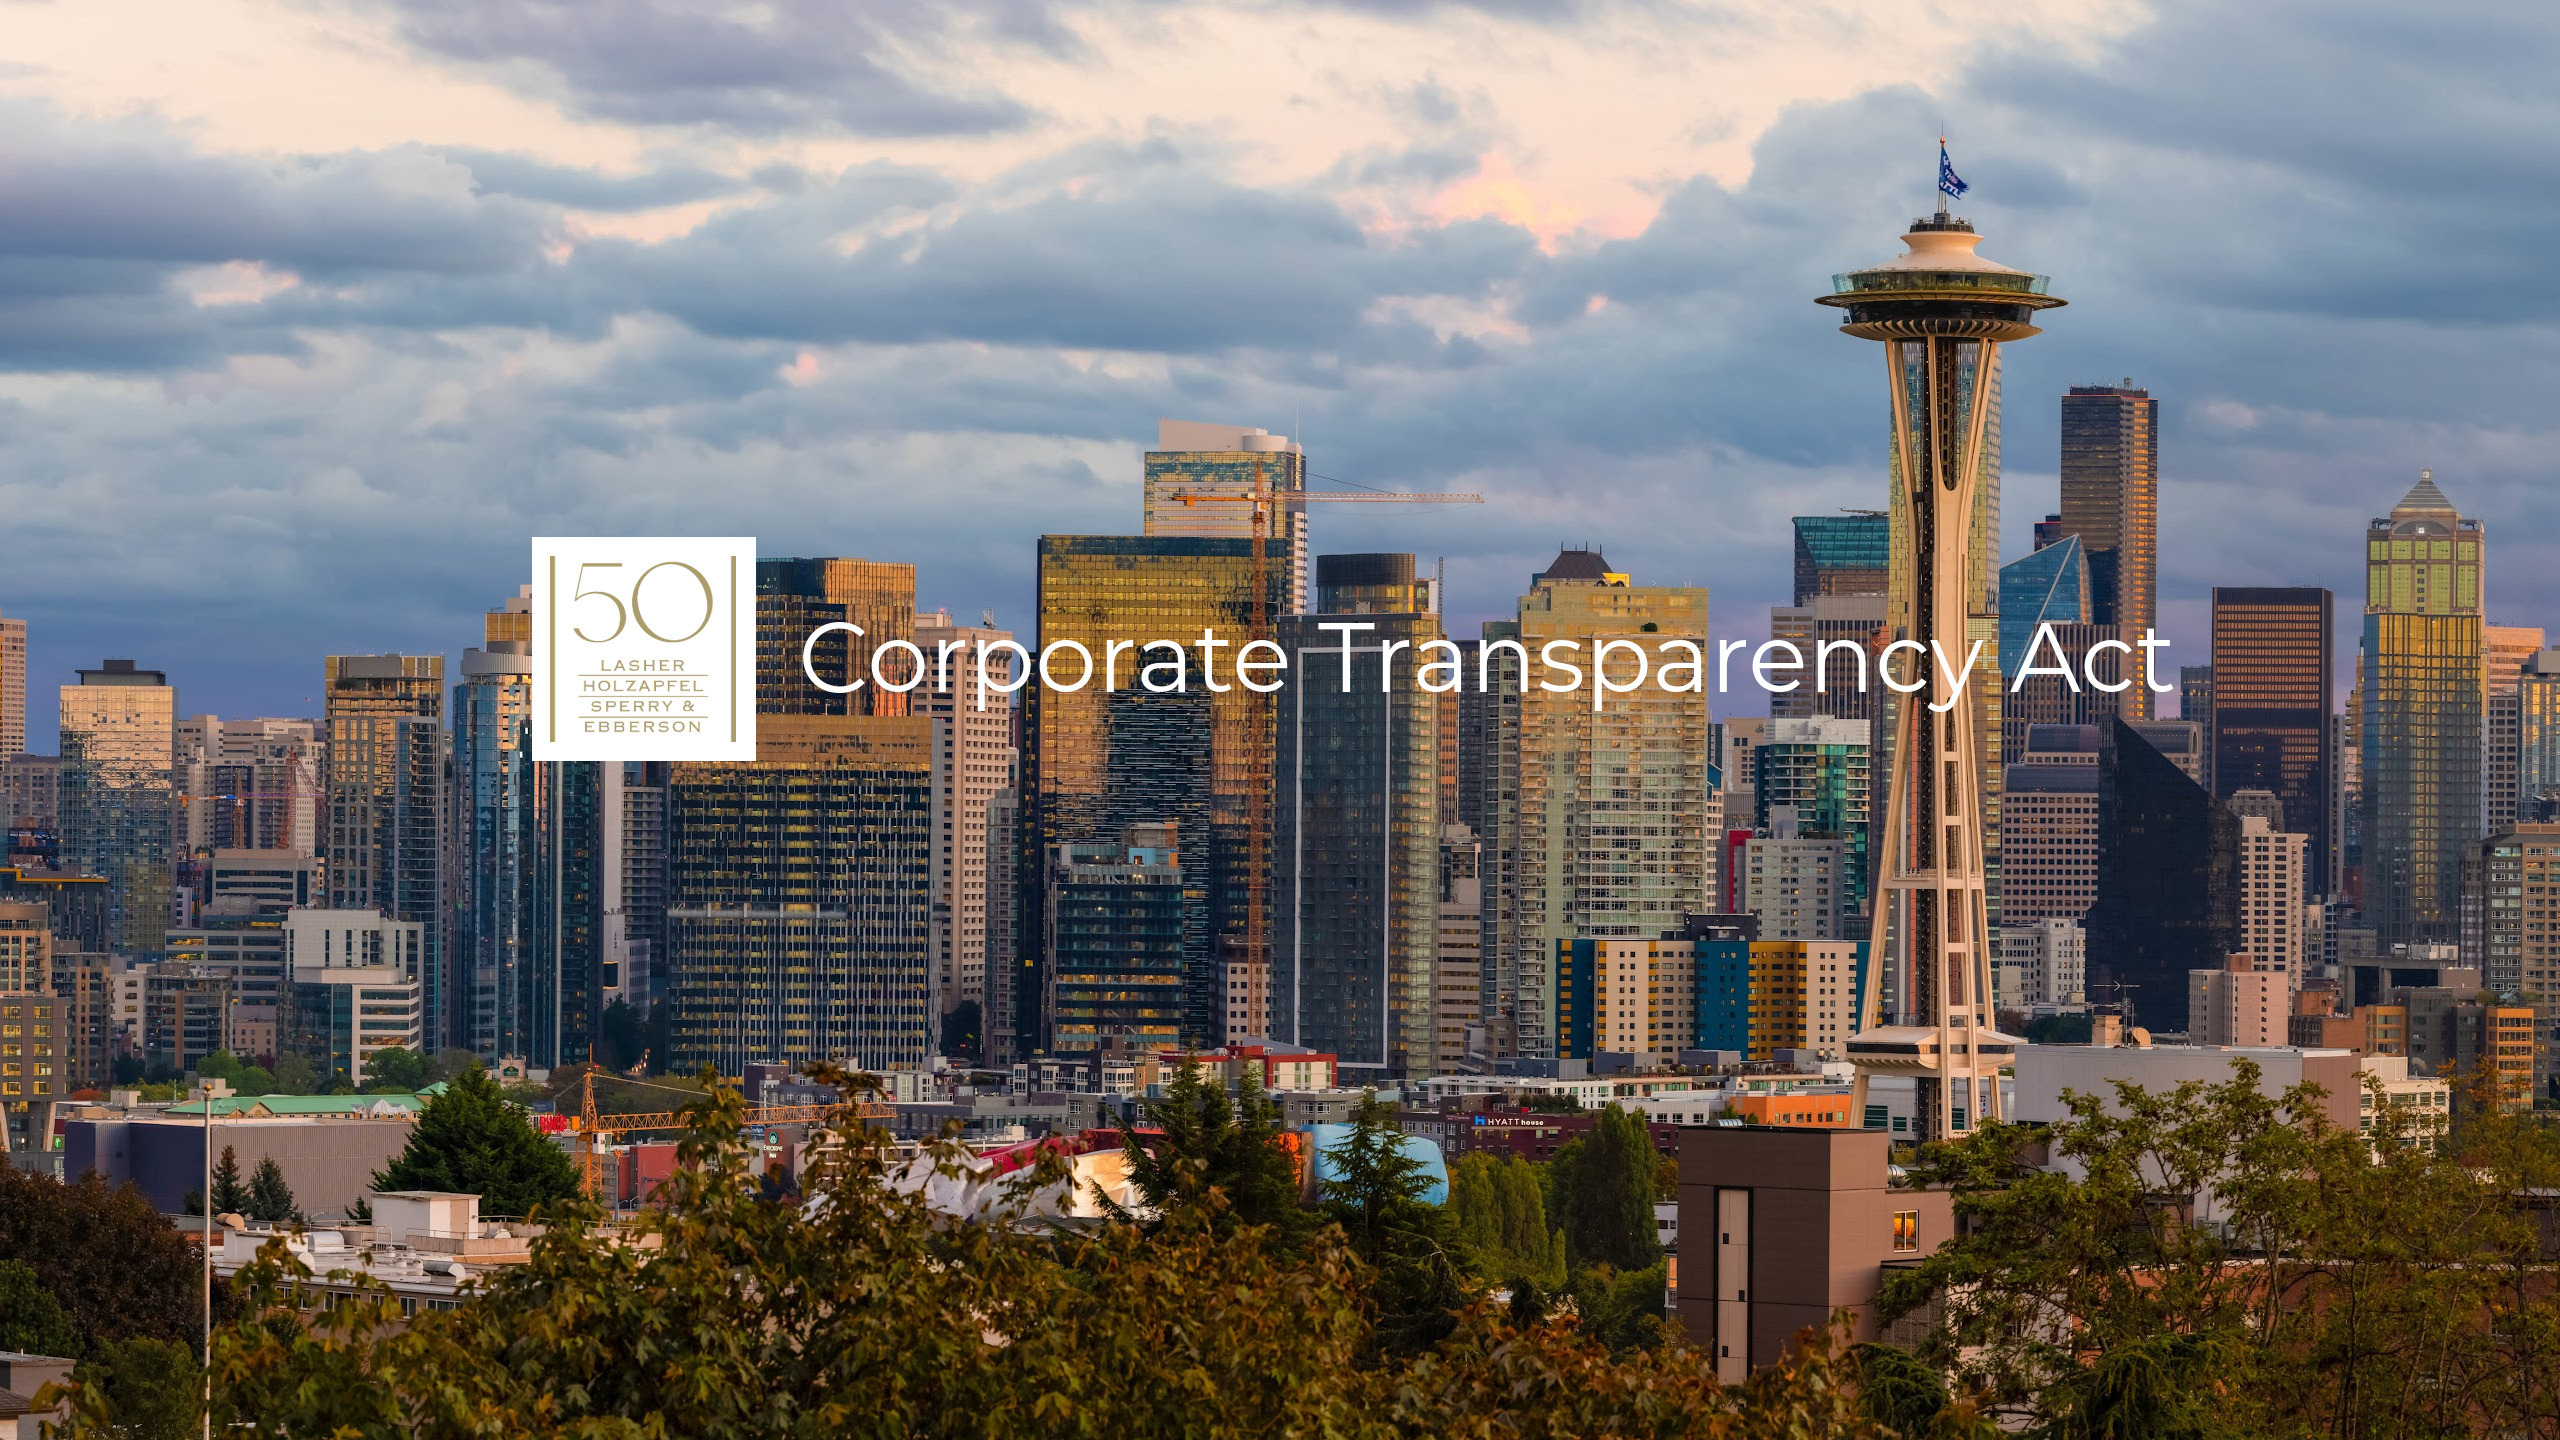 Business Obligations Under the Corporate Transparency Act: What You Need to Know